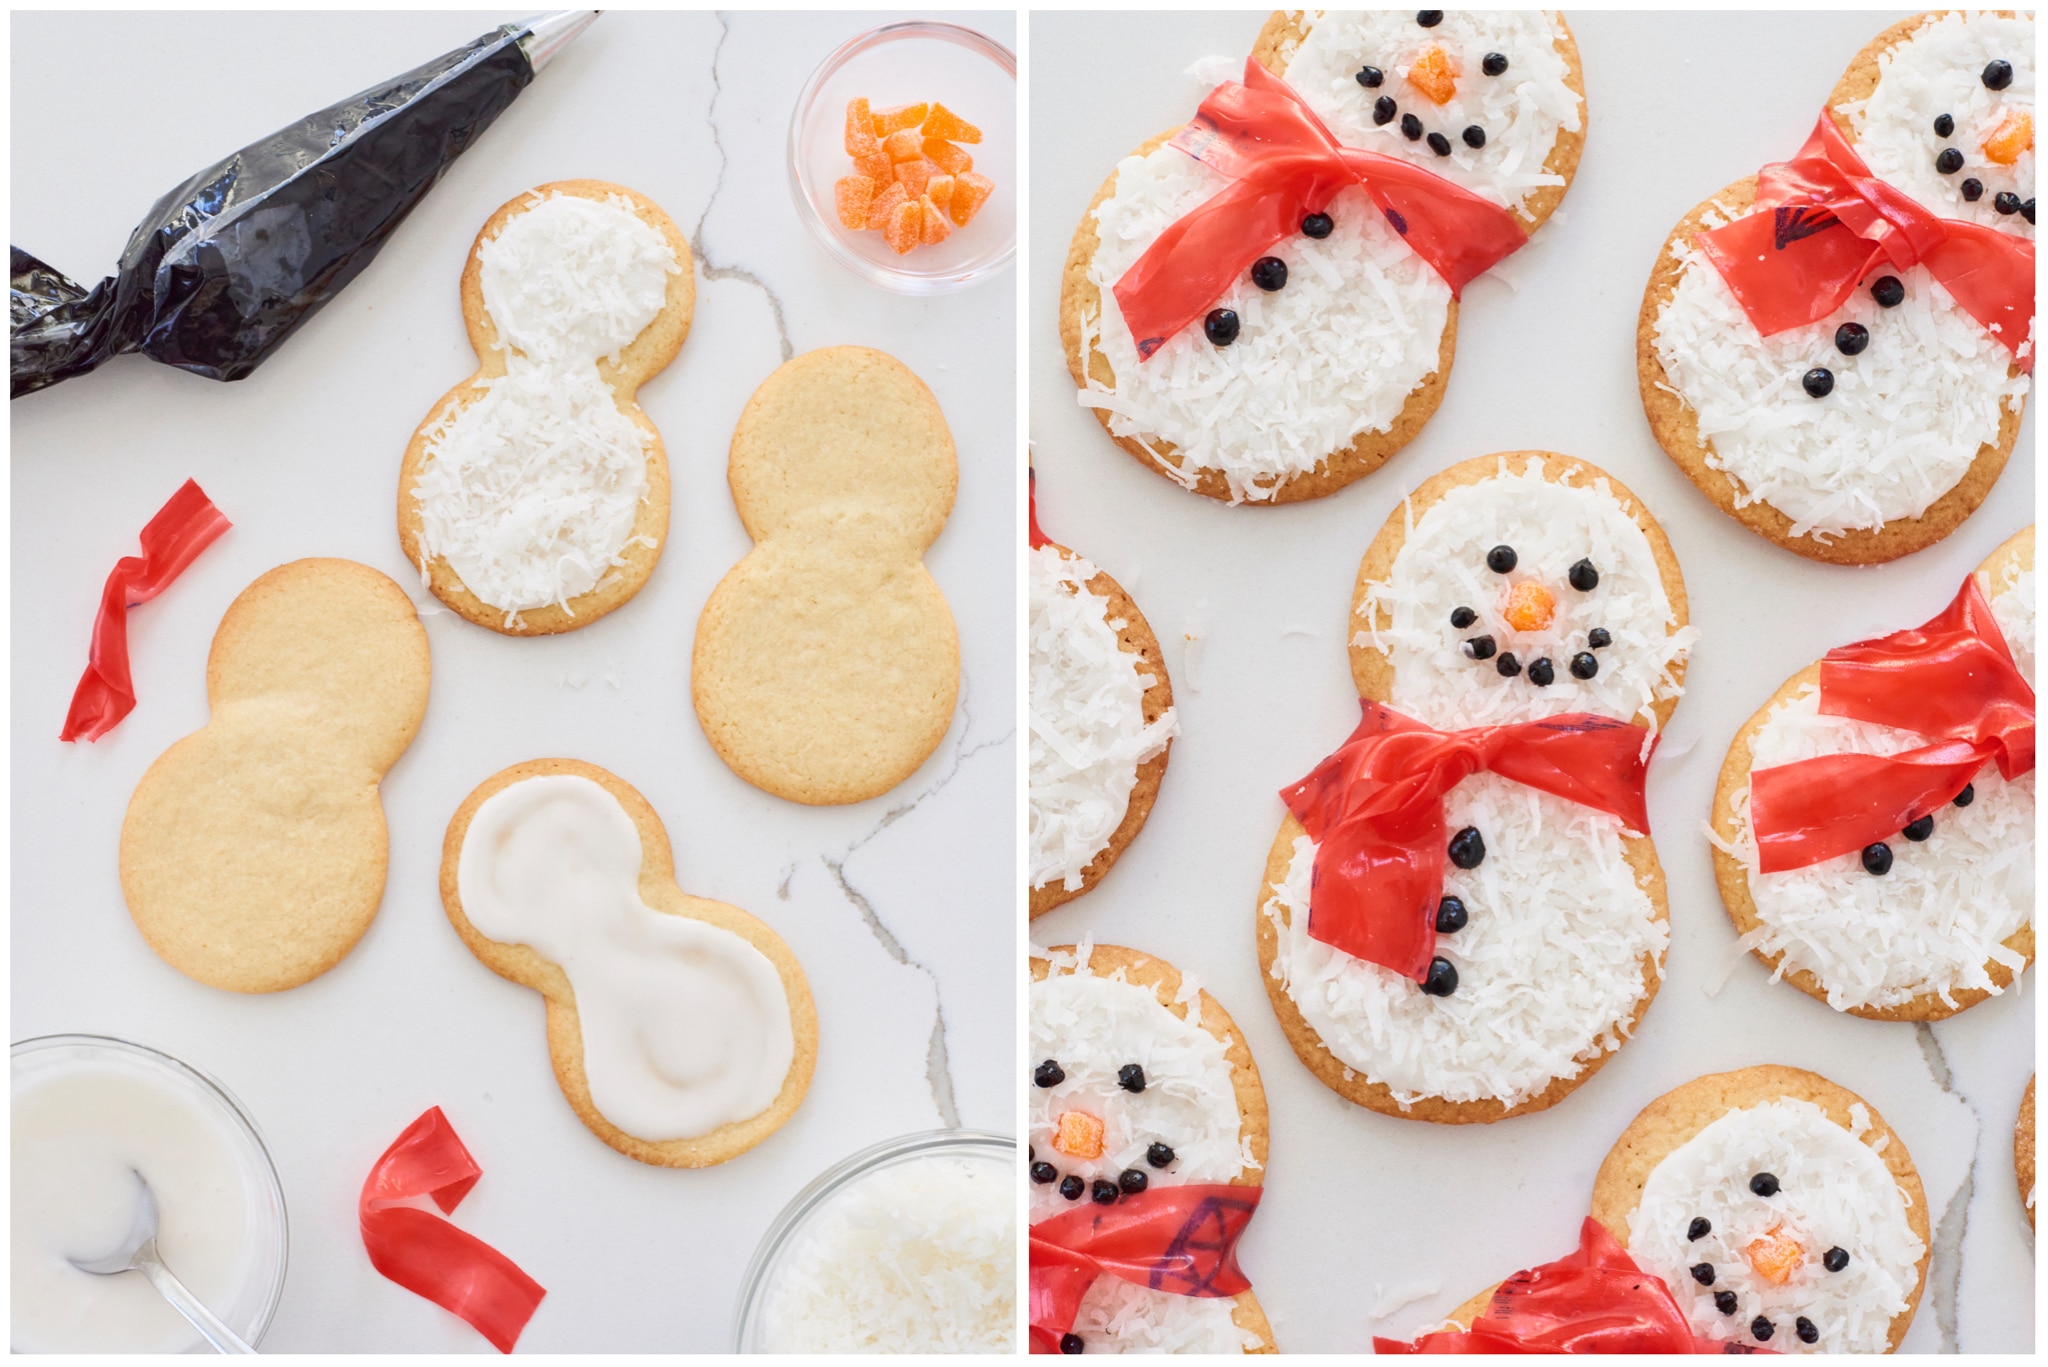 Festive Snowmen Cookies are shown in stages of decoration. The sugar cookies are coated in a homemade icing, covered in coconut flakes, with eyes, mouth, and buttons made from black icing. The snowman's scarf is made with fruit roll-ups and the nose is an orange gumdrop.